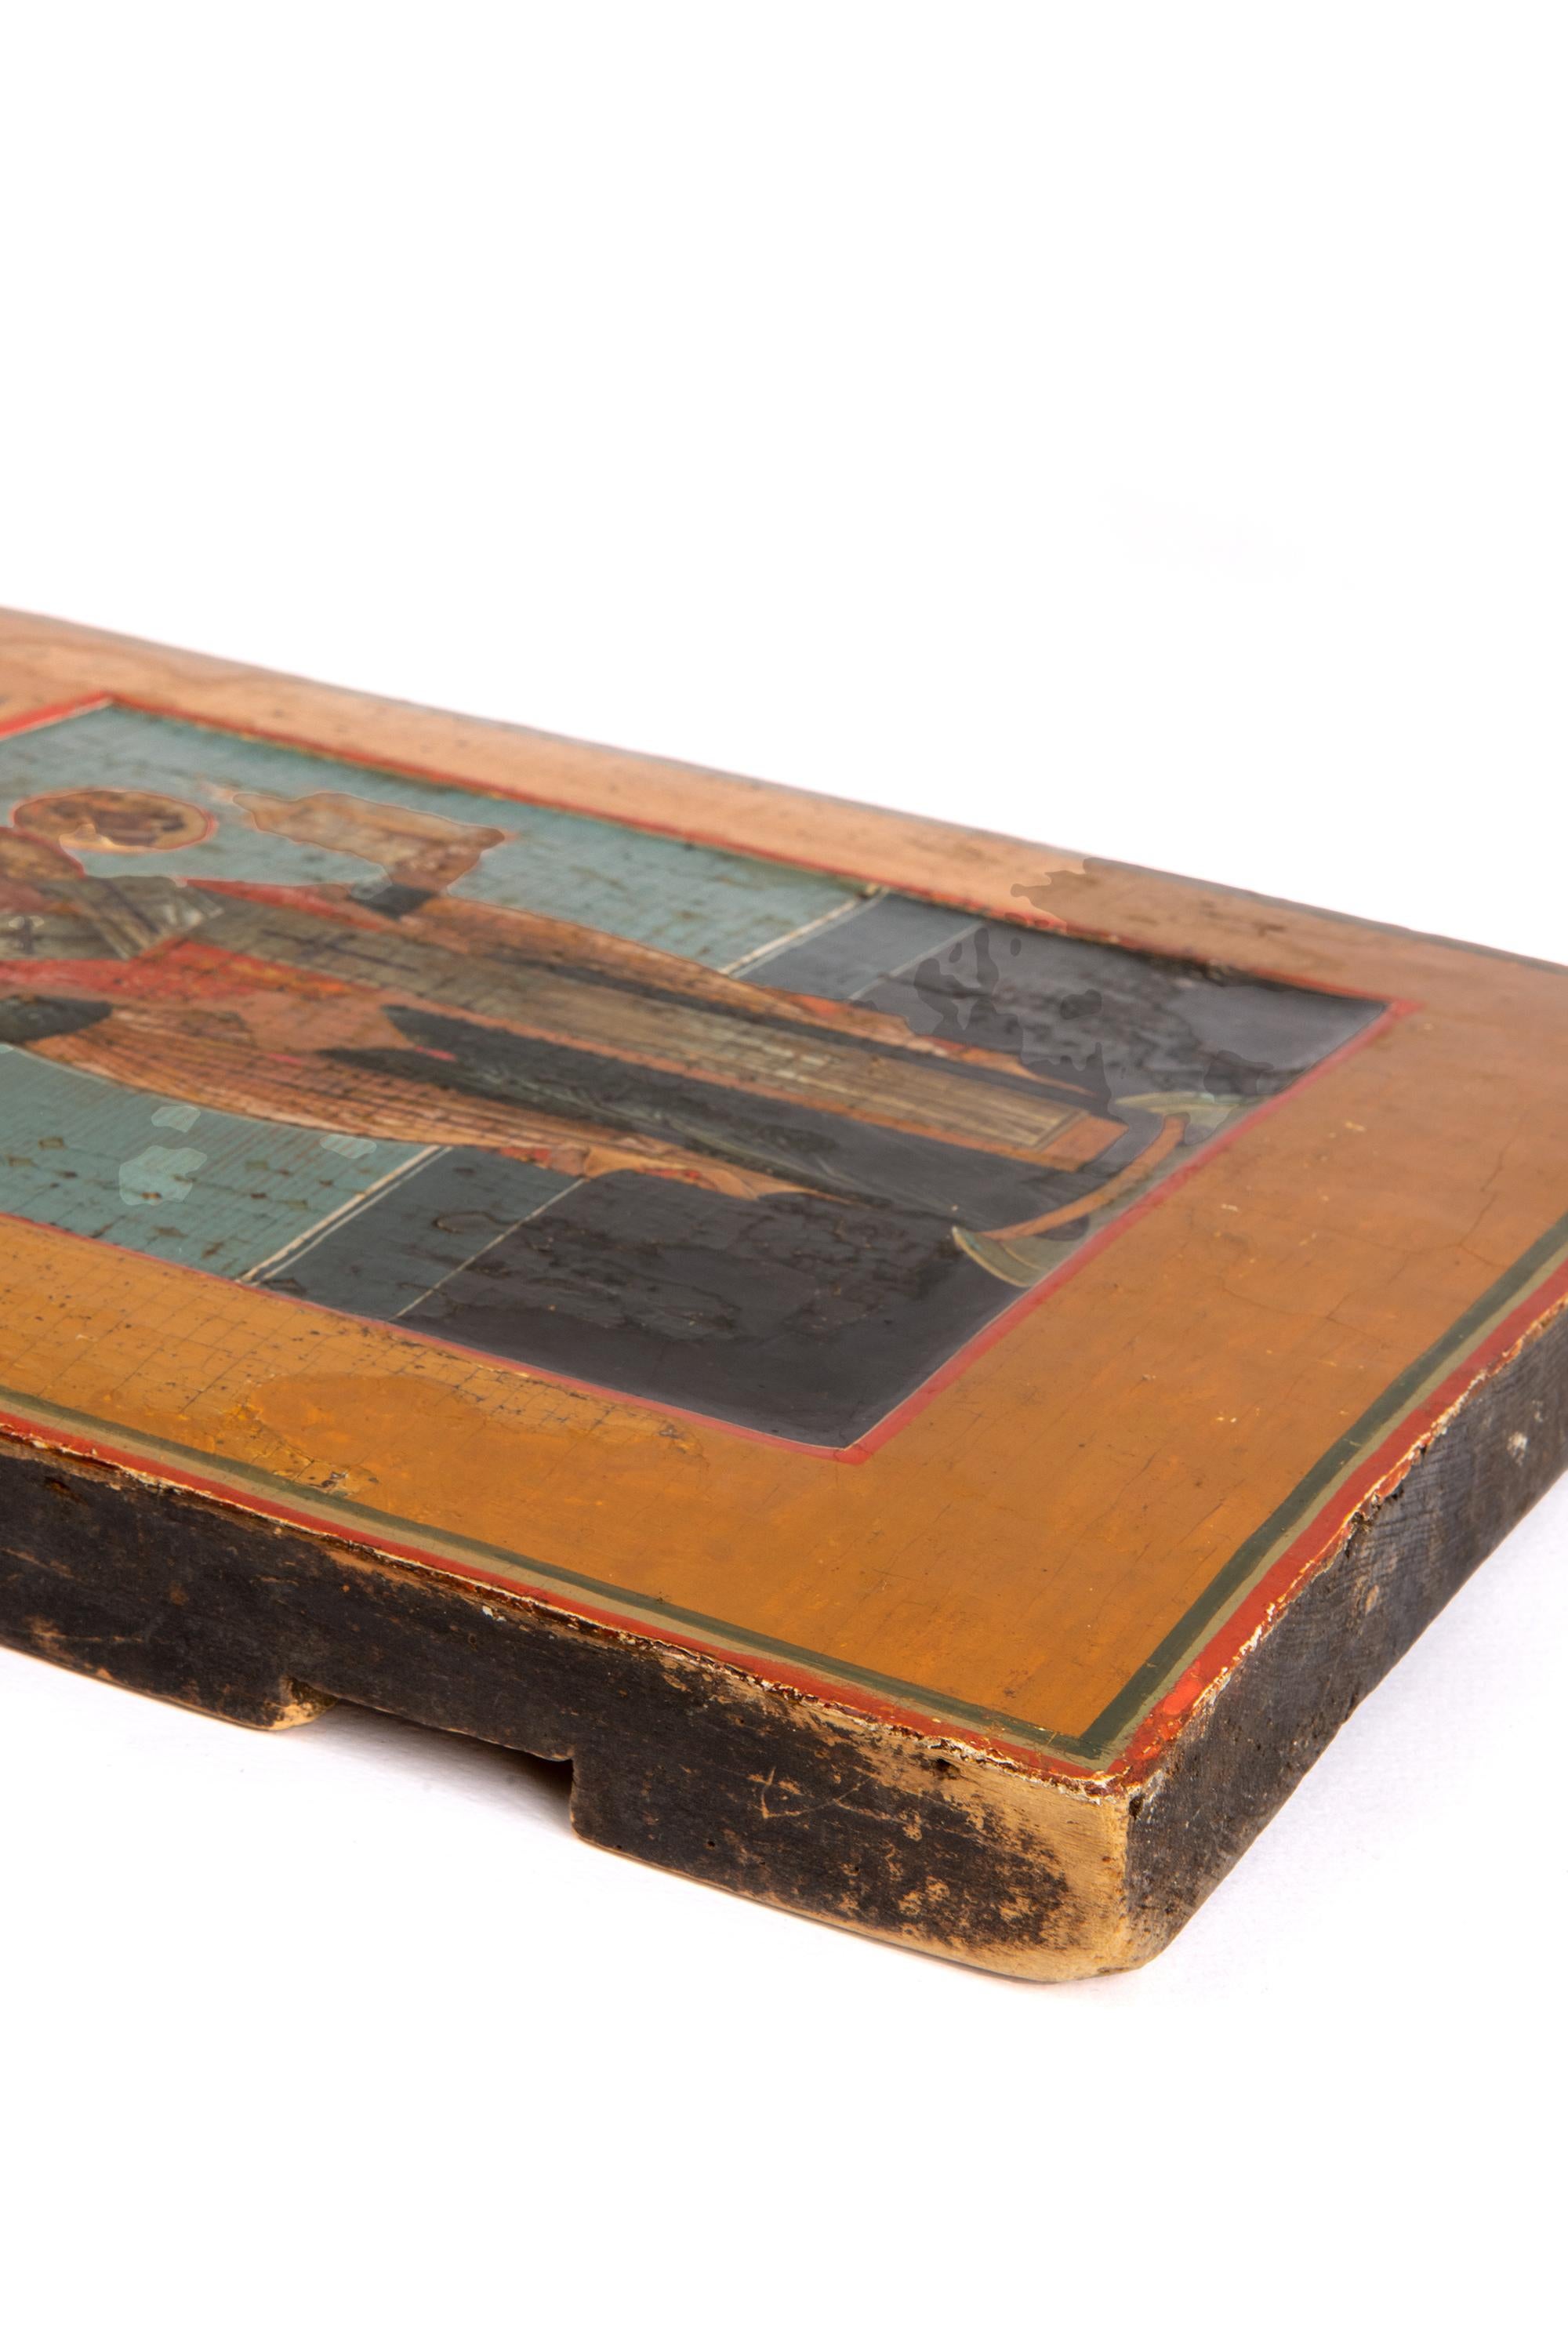 Women's or Men's Russian Icon, 18th Century Russian Wooden Table with Egg Tempera For Sale